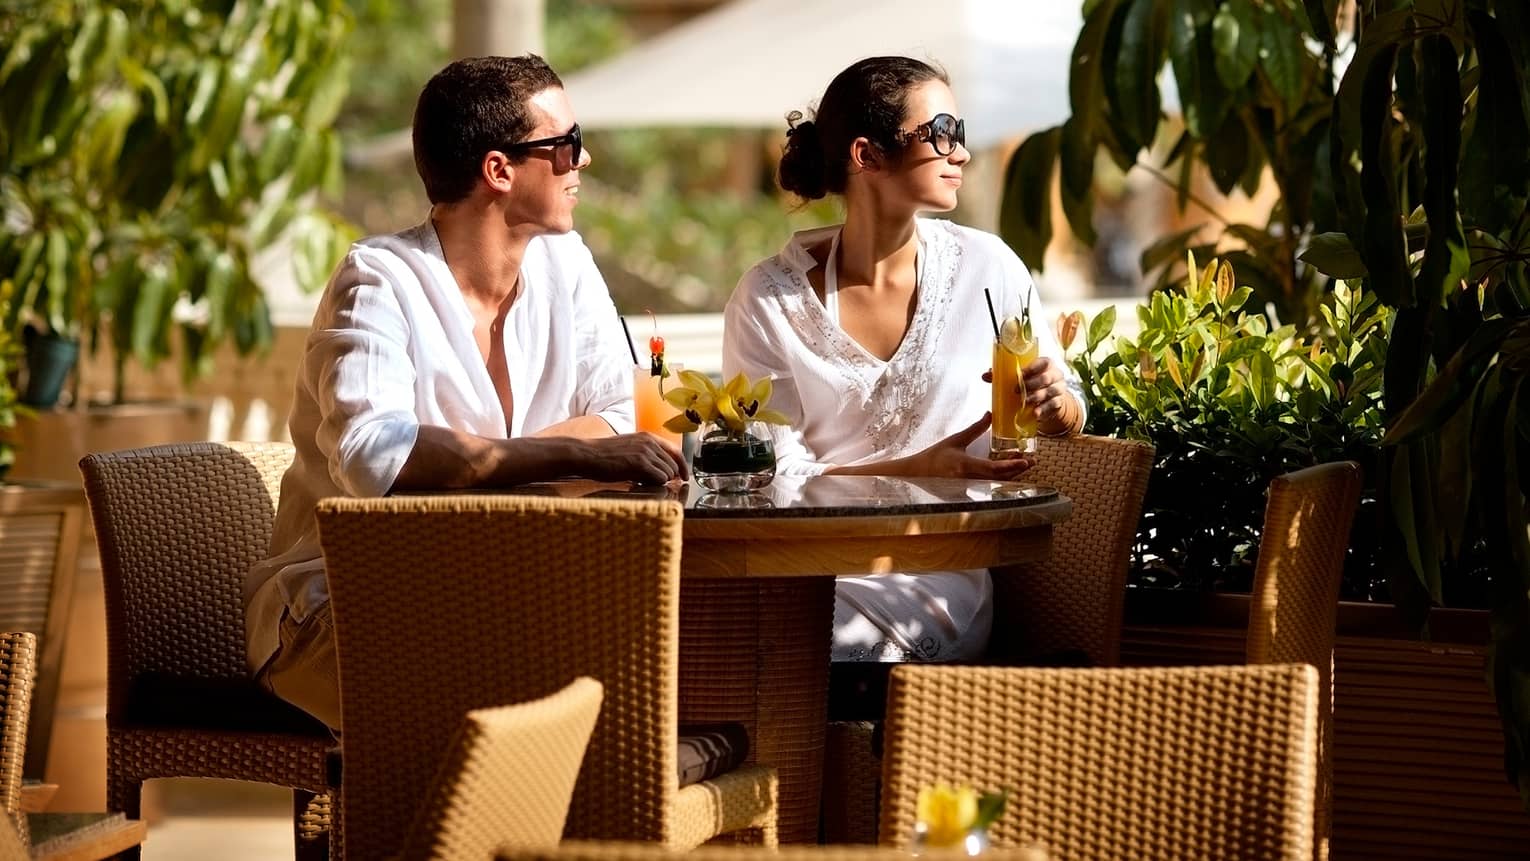 Couple wearing white linen shirts, sunglasses drinks cocktails at patio table